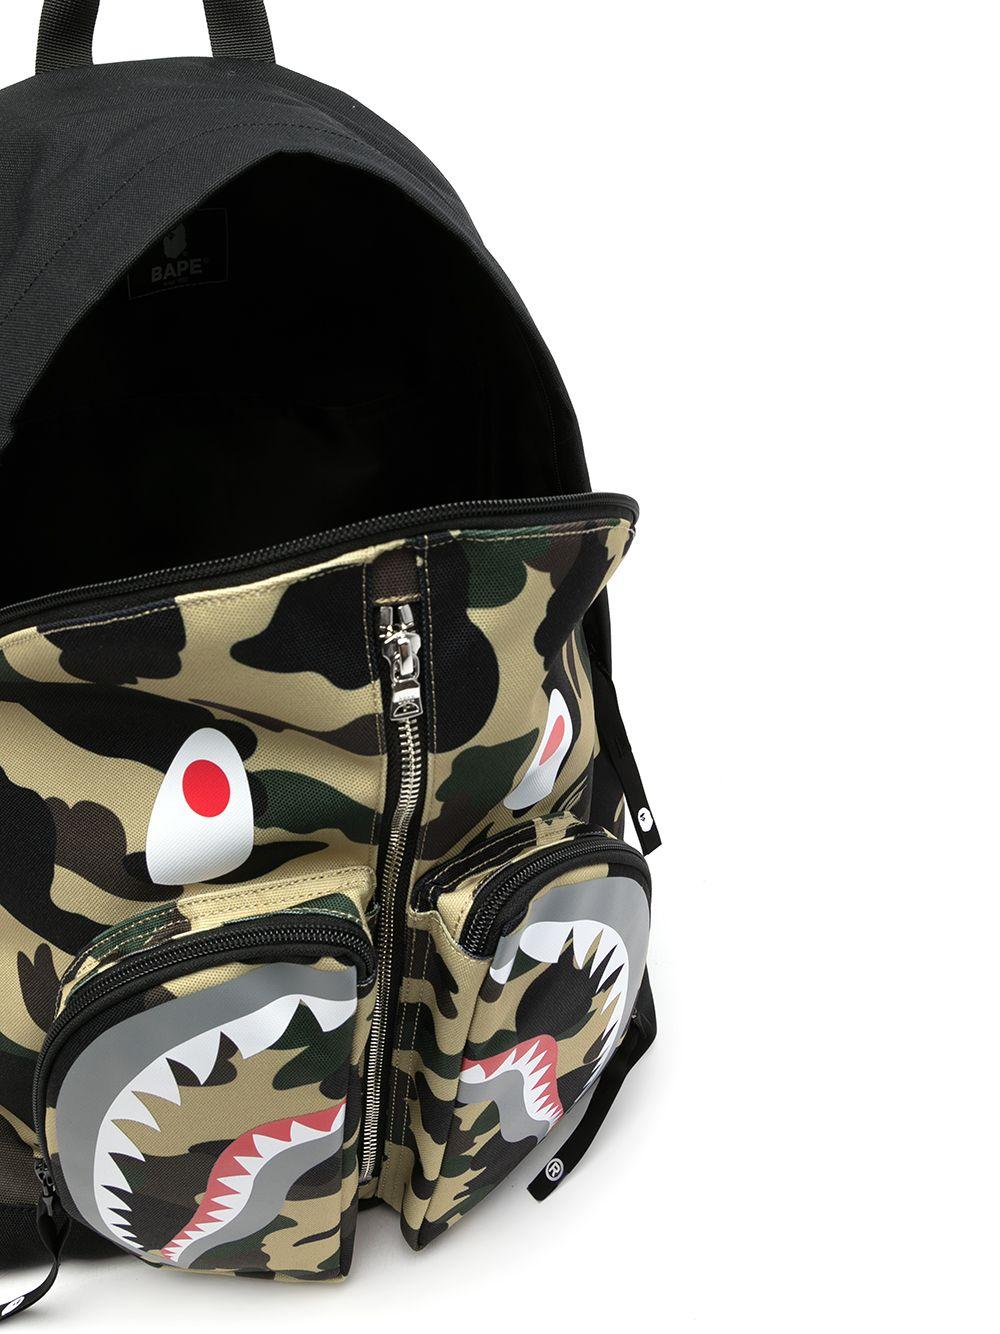  AKMASK 17inch Shark Backpack Camouflage 3D Print